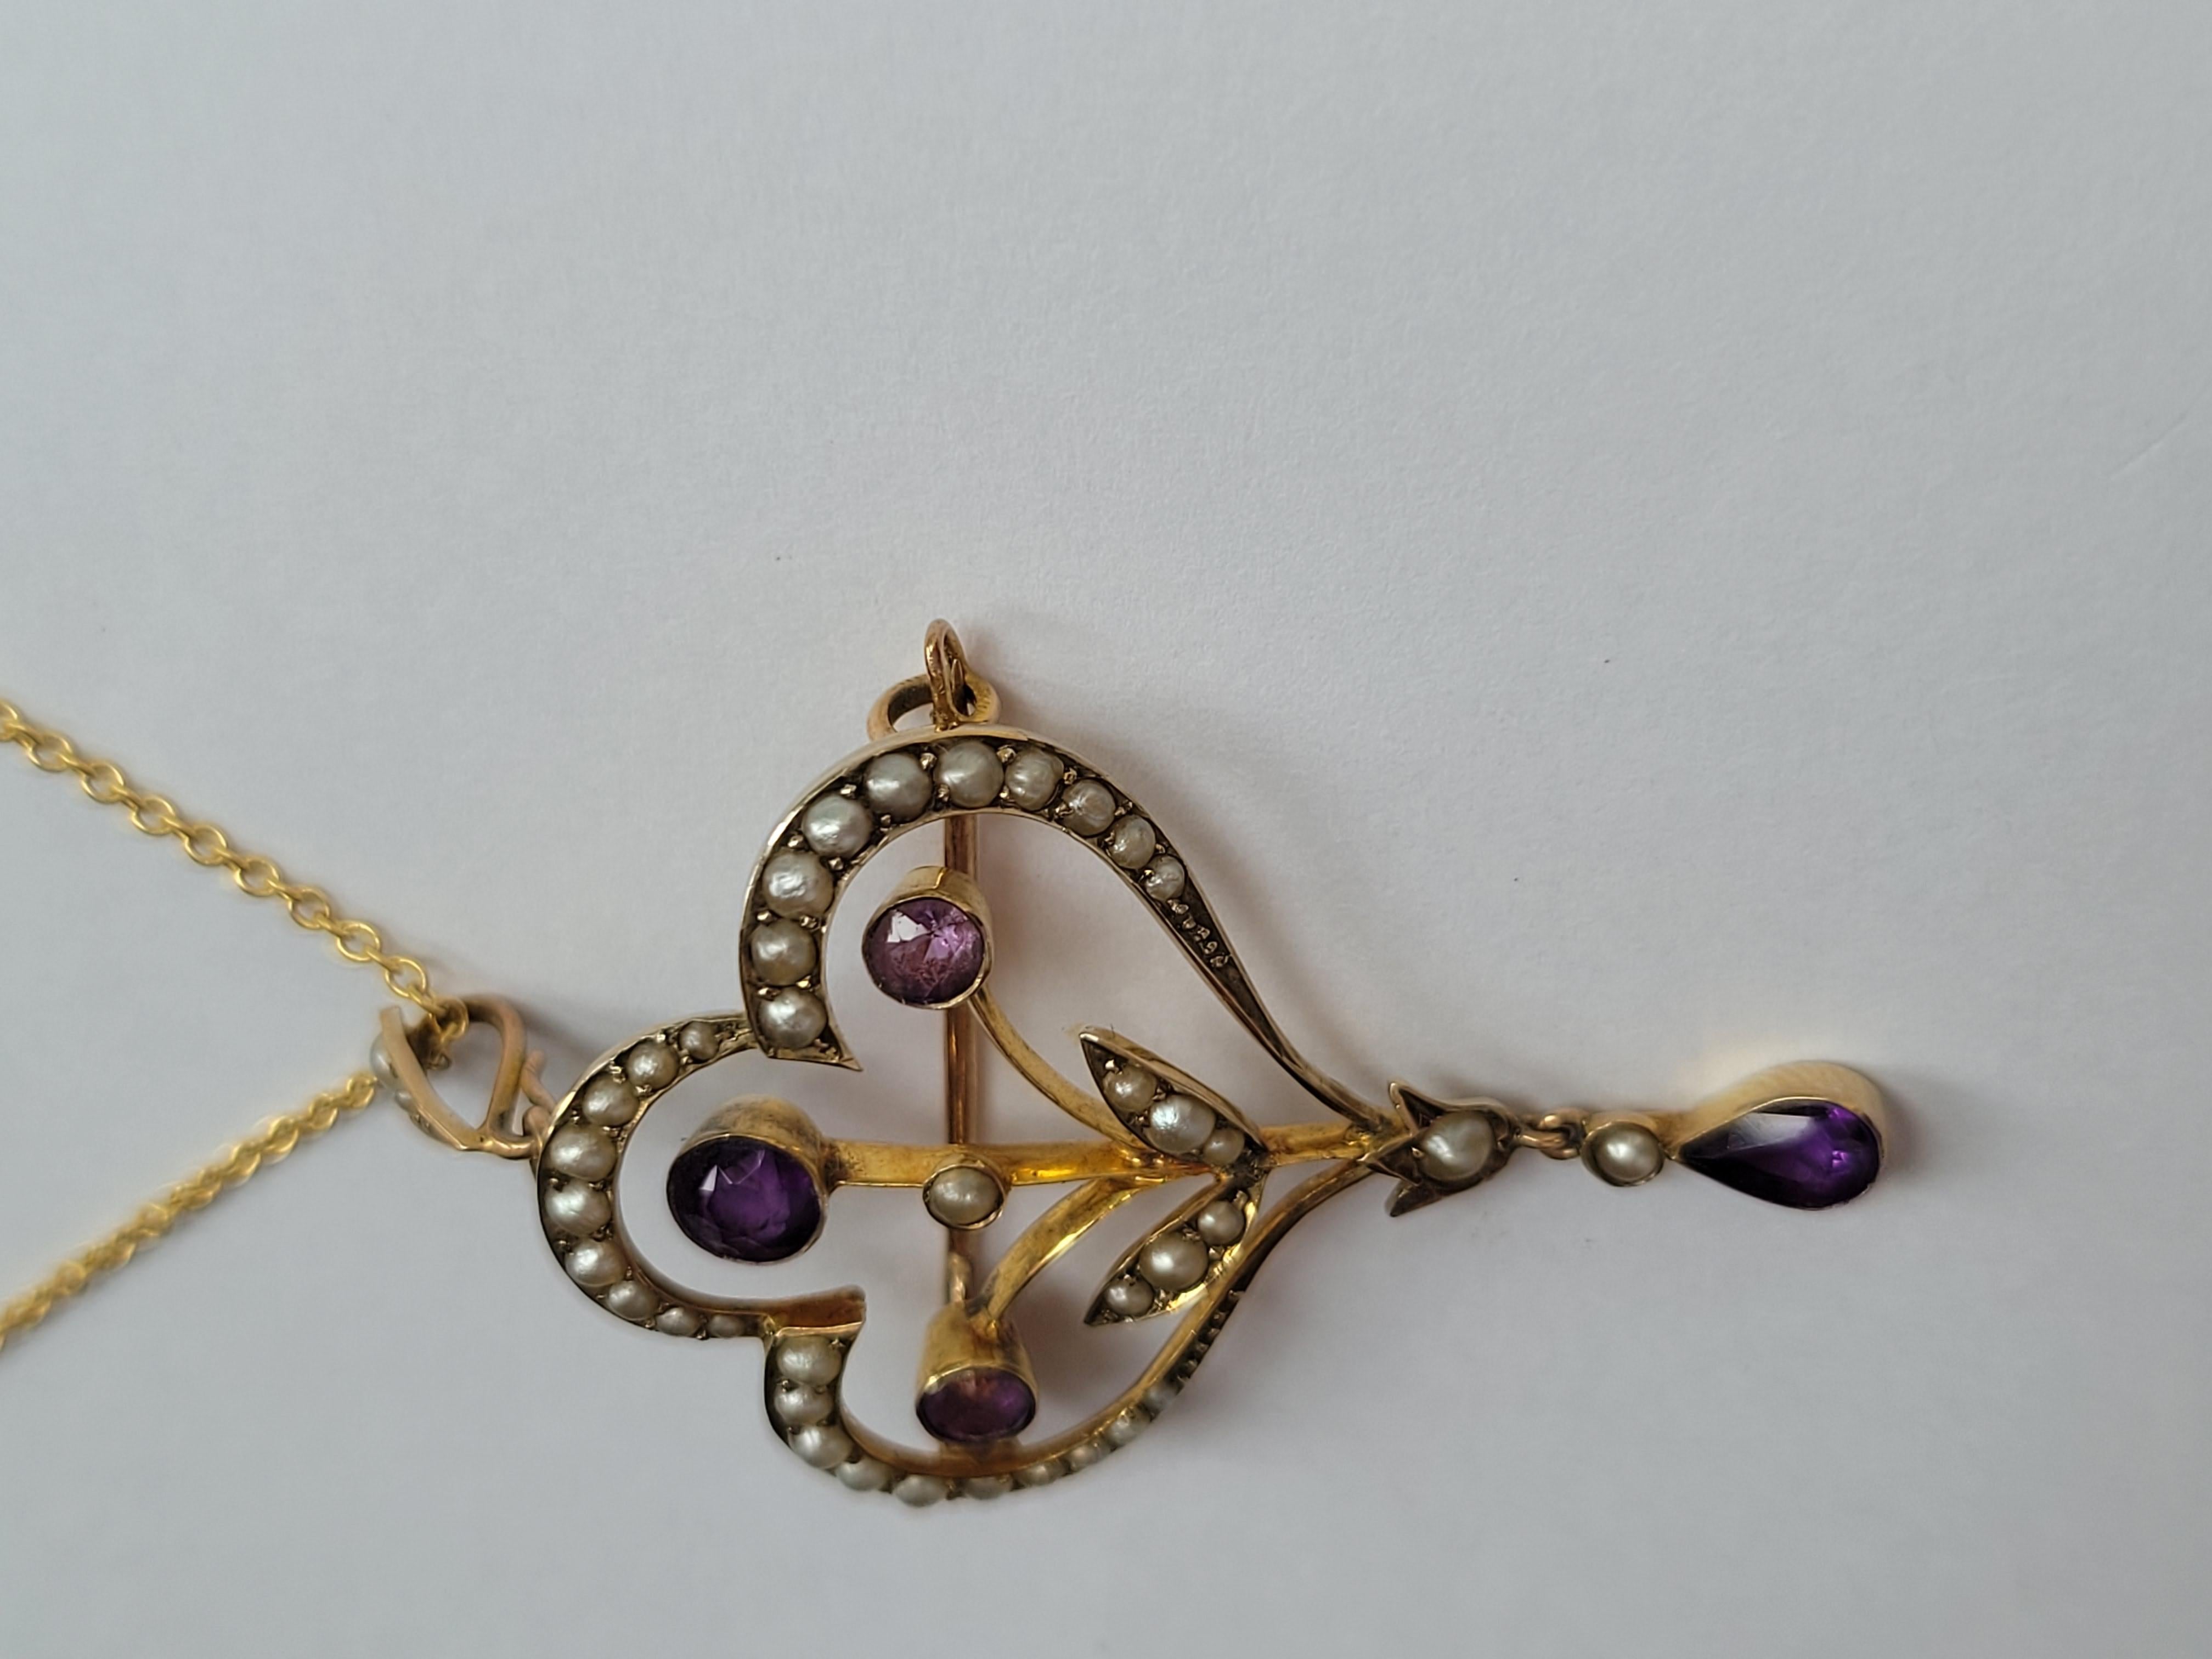 Antique Edwardian Amethyst Pearl Gold Brooch Pendant Necklace For Sale 4